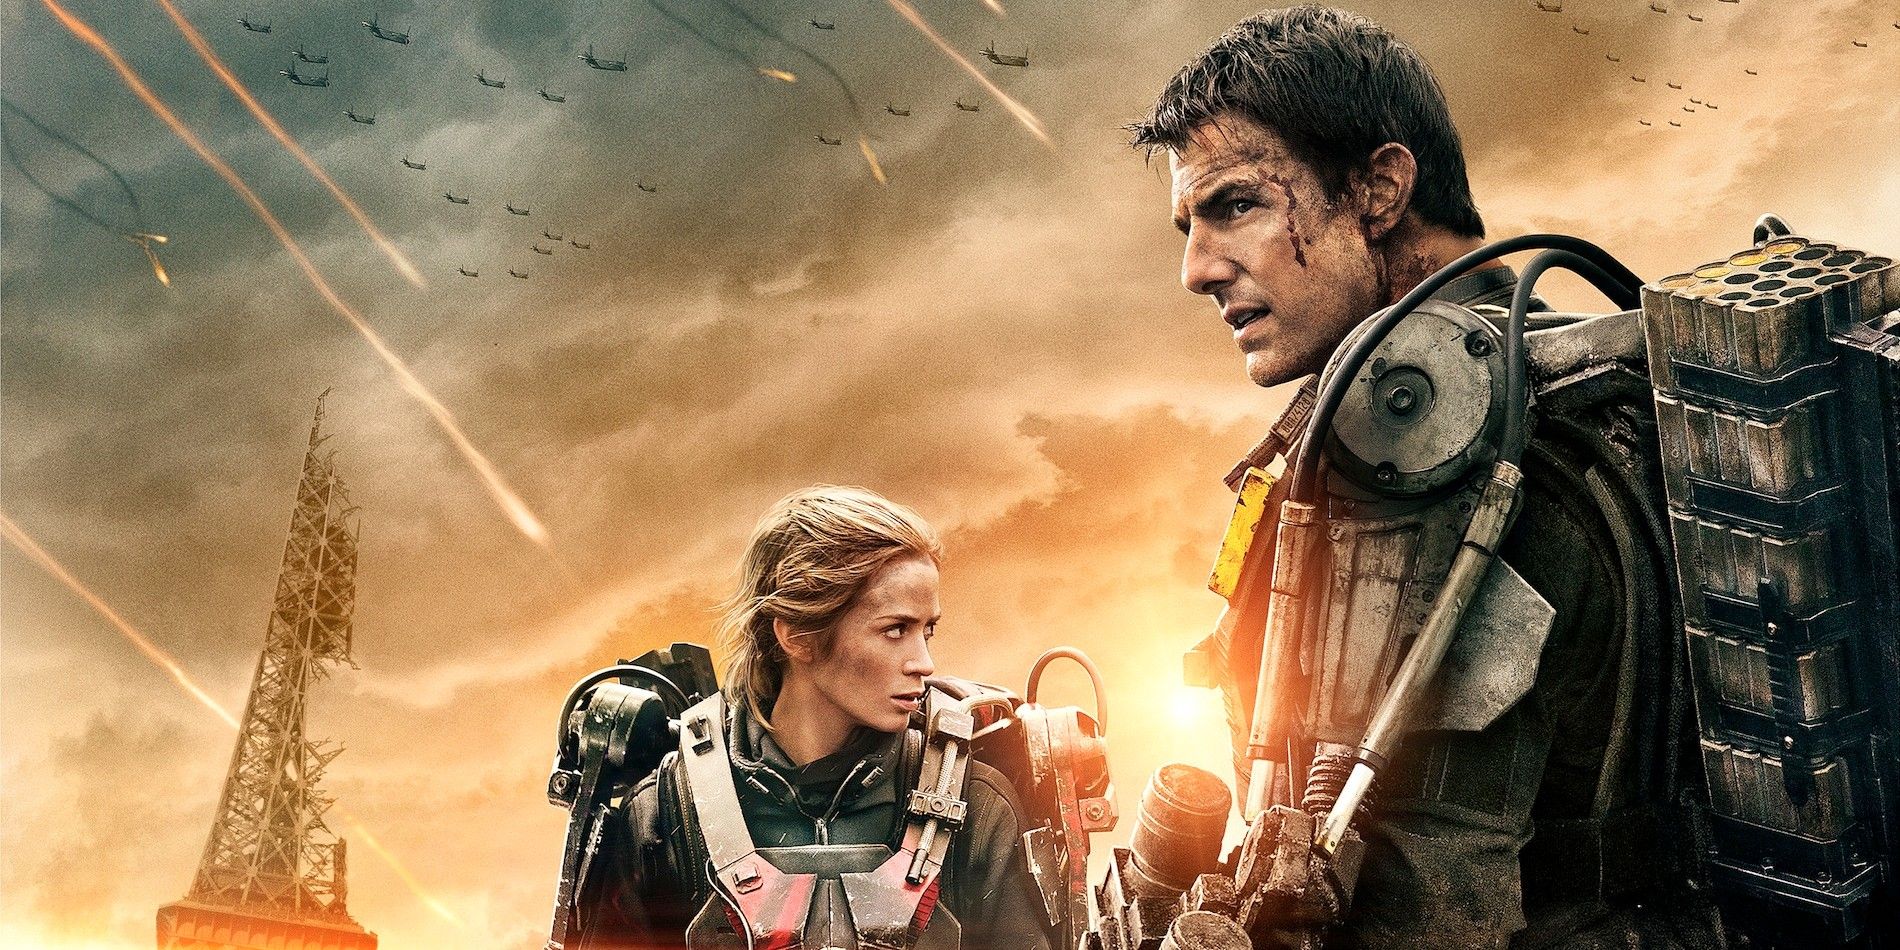 Edge of Tomorrow 2 Script Is Great, Says Emily Blunt